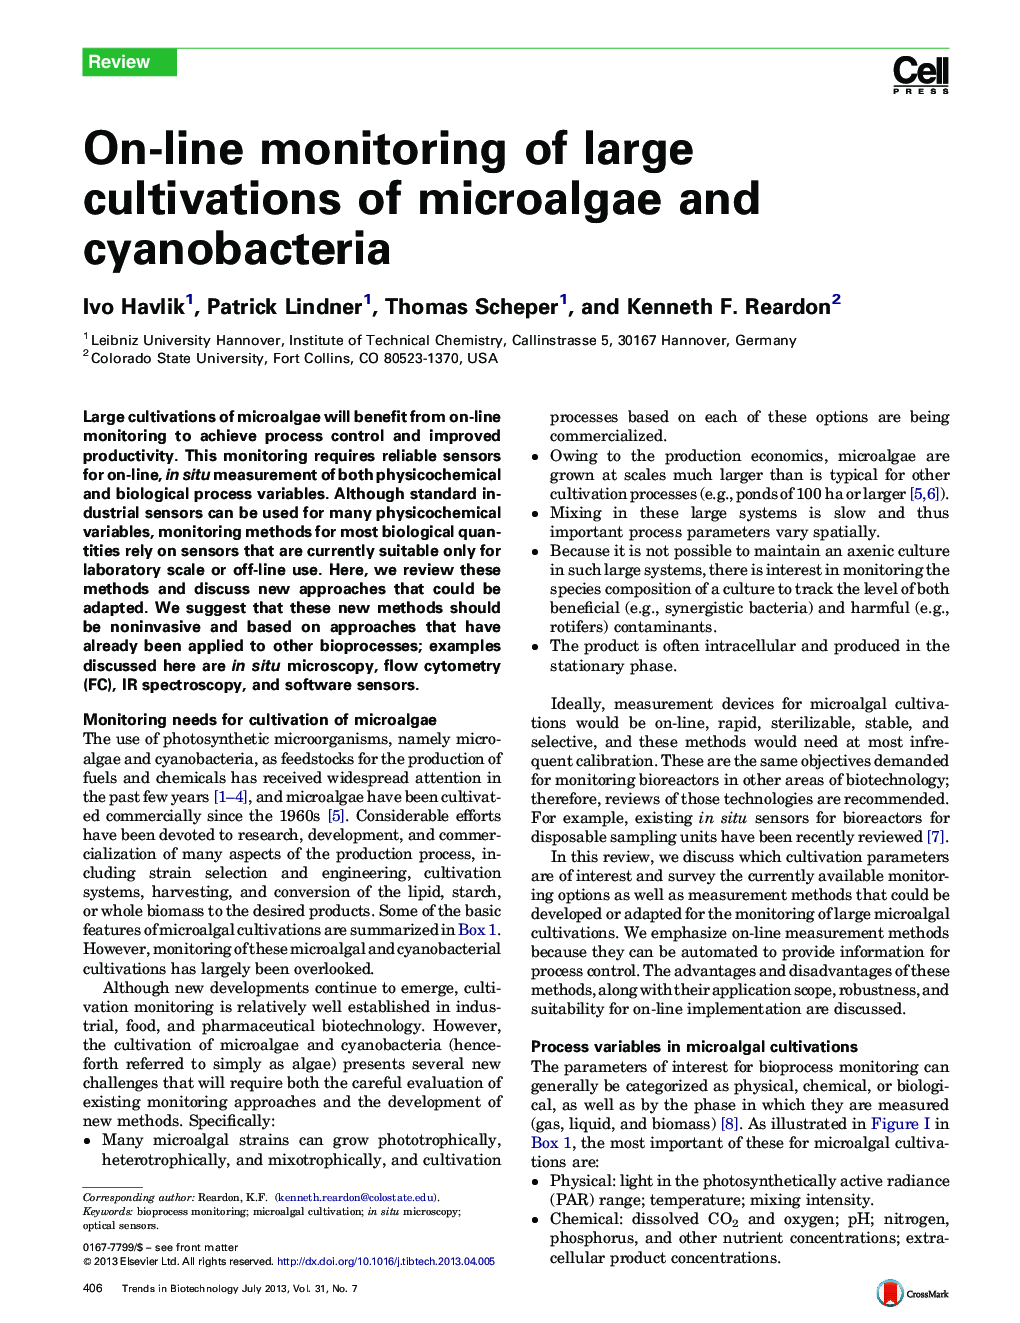 On-line monitoring of large cultivations of microalgae and cyanobacteria